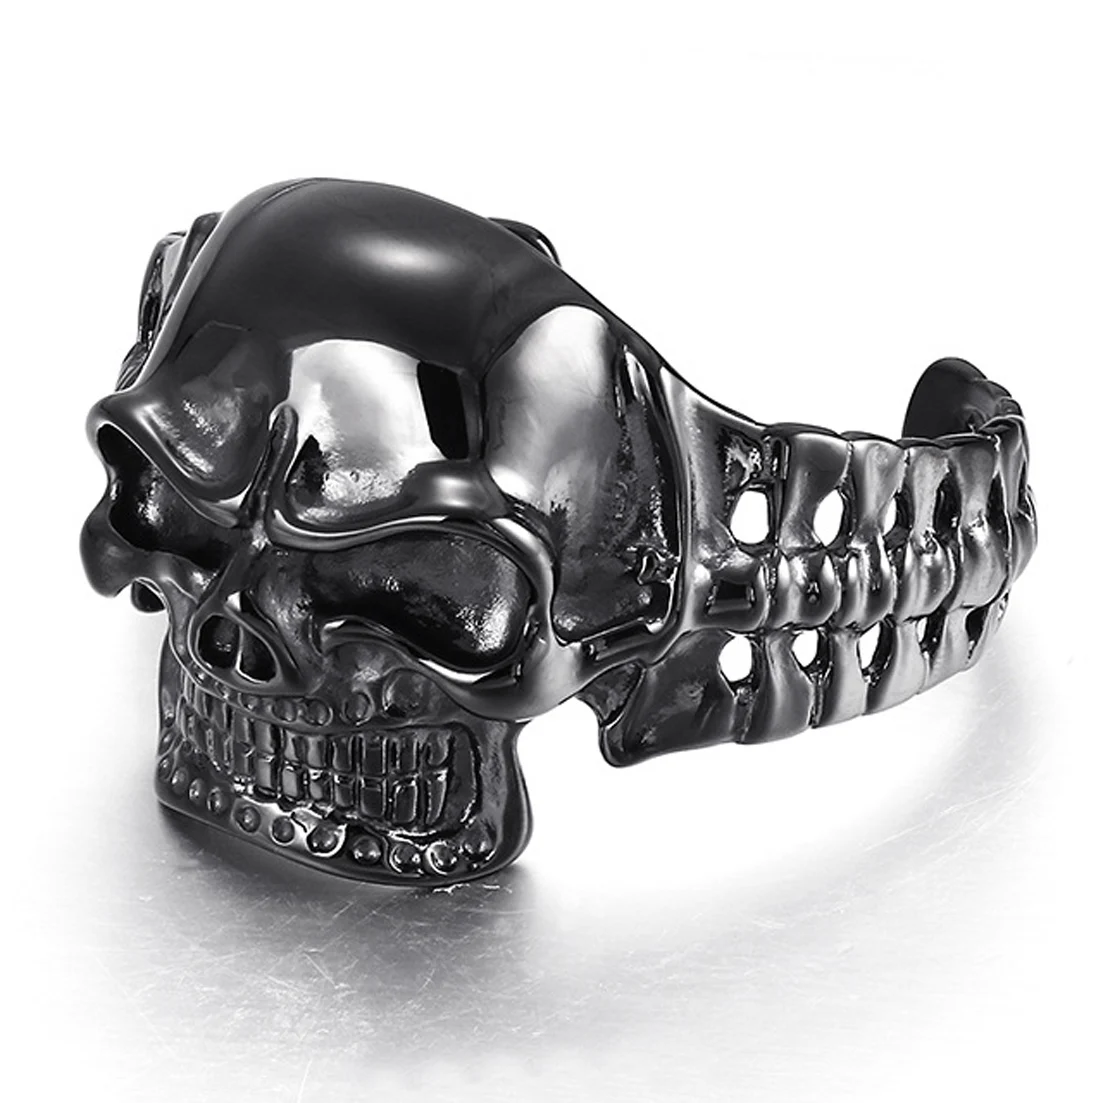 

New Fashion Black Color 316L Stainless Steel Bangles Huge Heavy Skull Mens Rock Punk Jewlery Gift